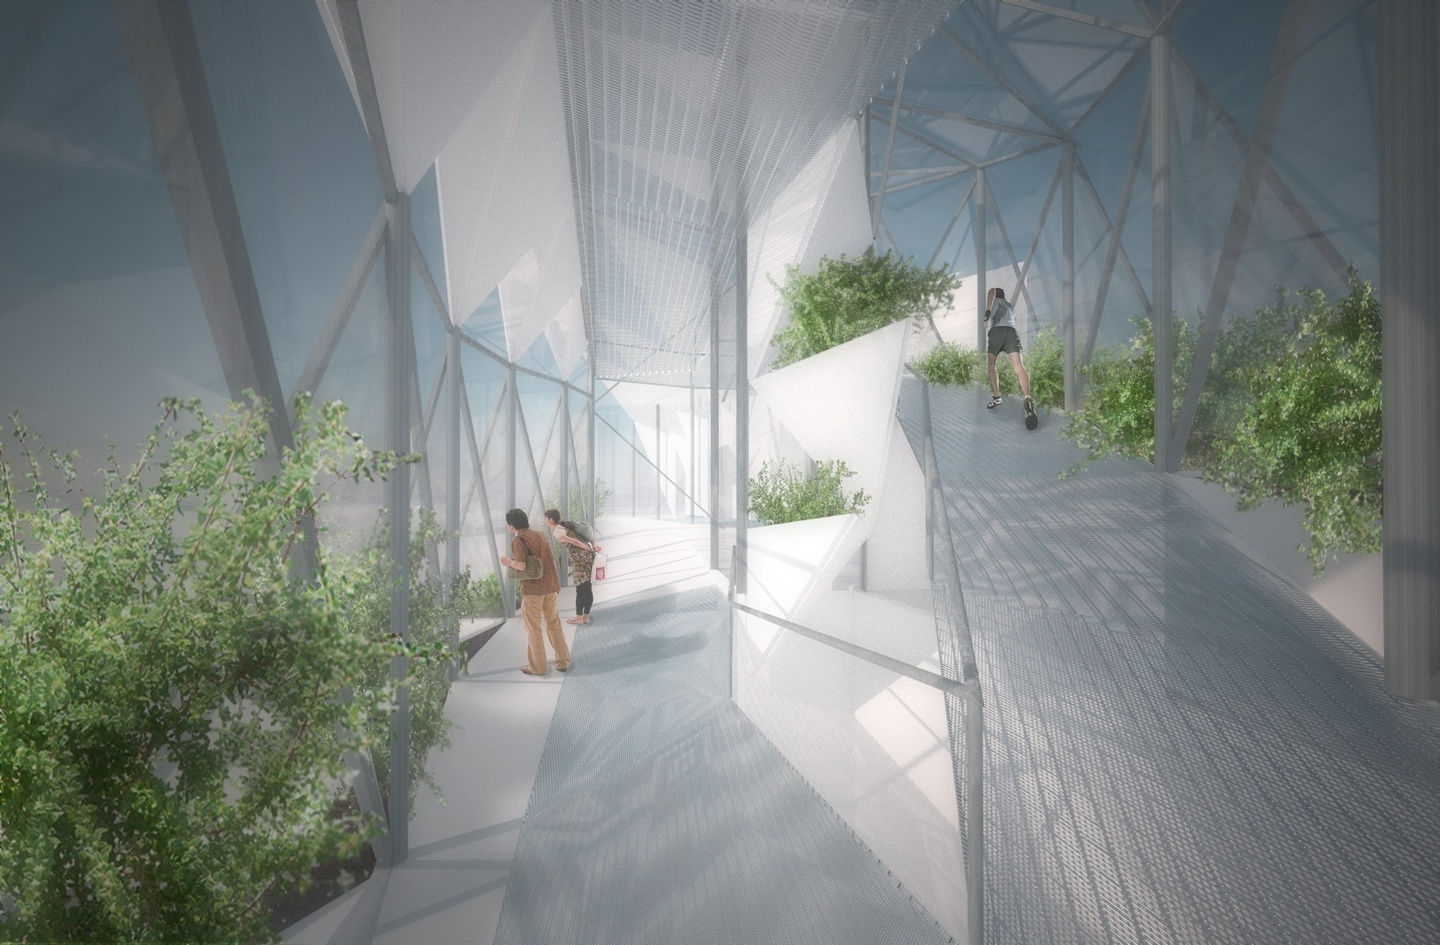 Perspective rendering inside an open-walled structure with two tiers connected by a ramp. Metal beams suspend a corrugated white roof and foliage grows along the sides of the path. People walk and jog along the path.